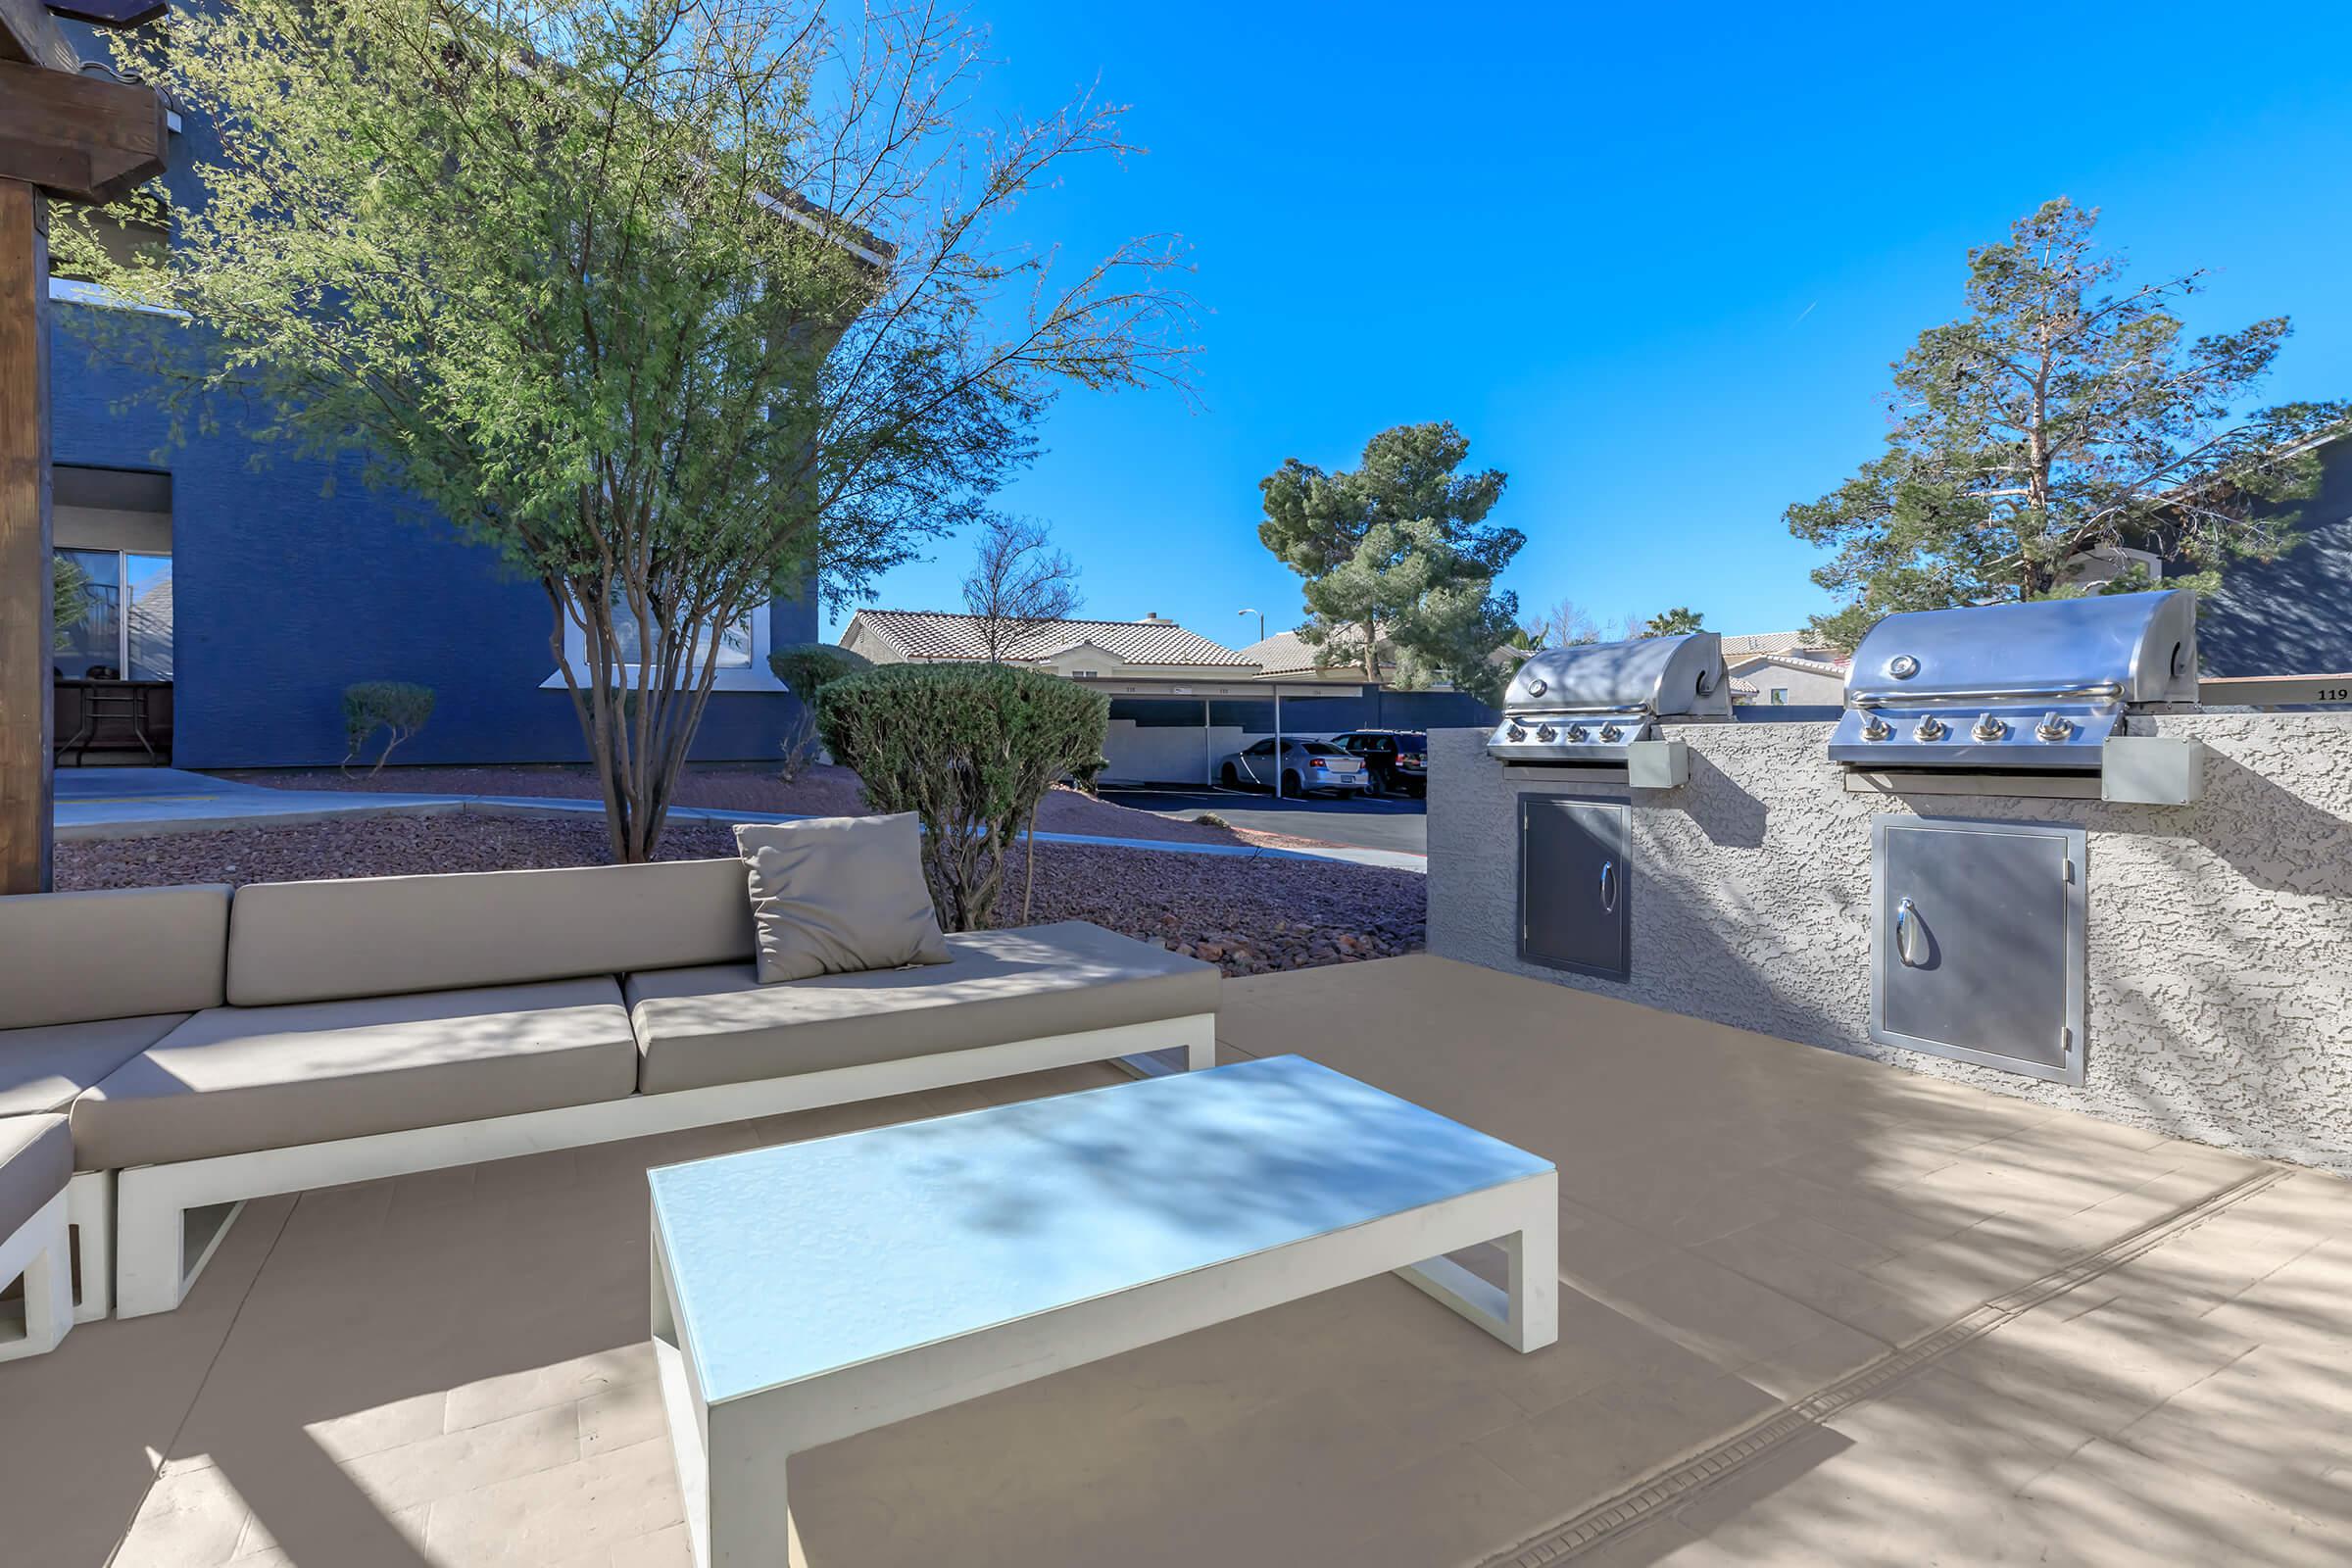 Barbecue and outdoor dining with TV at Sunset Hills in Henderson, Nevada